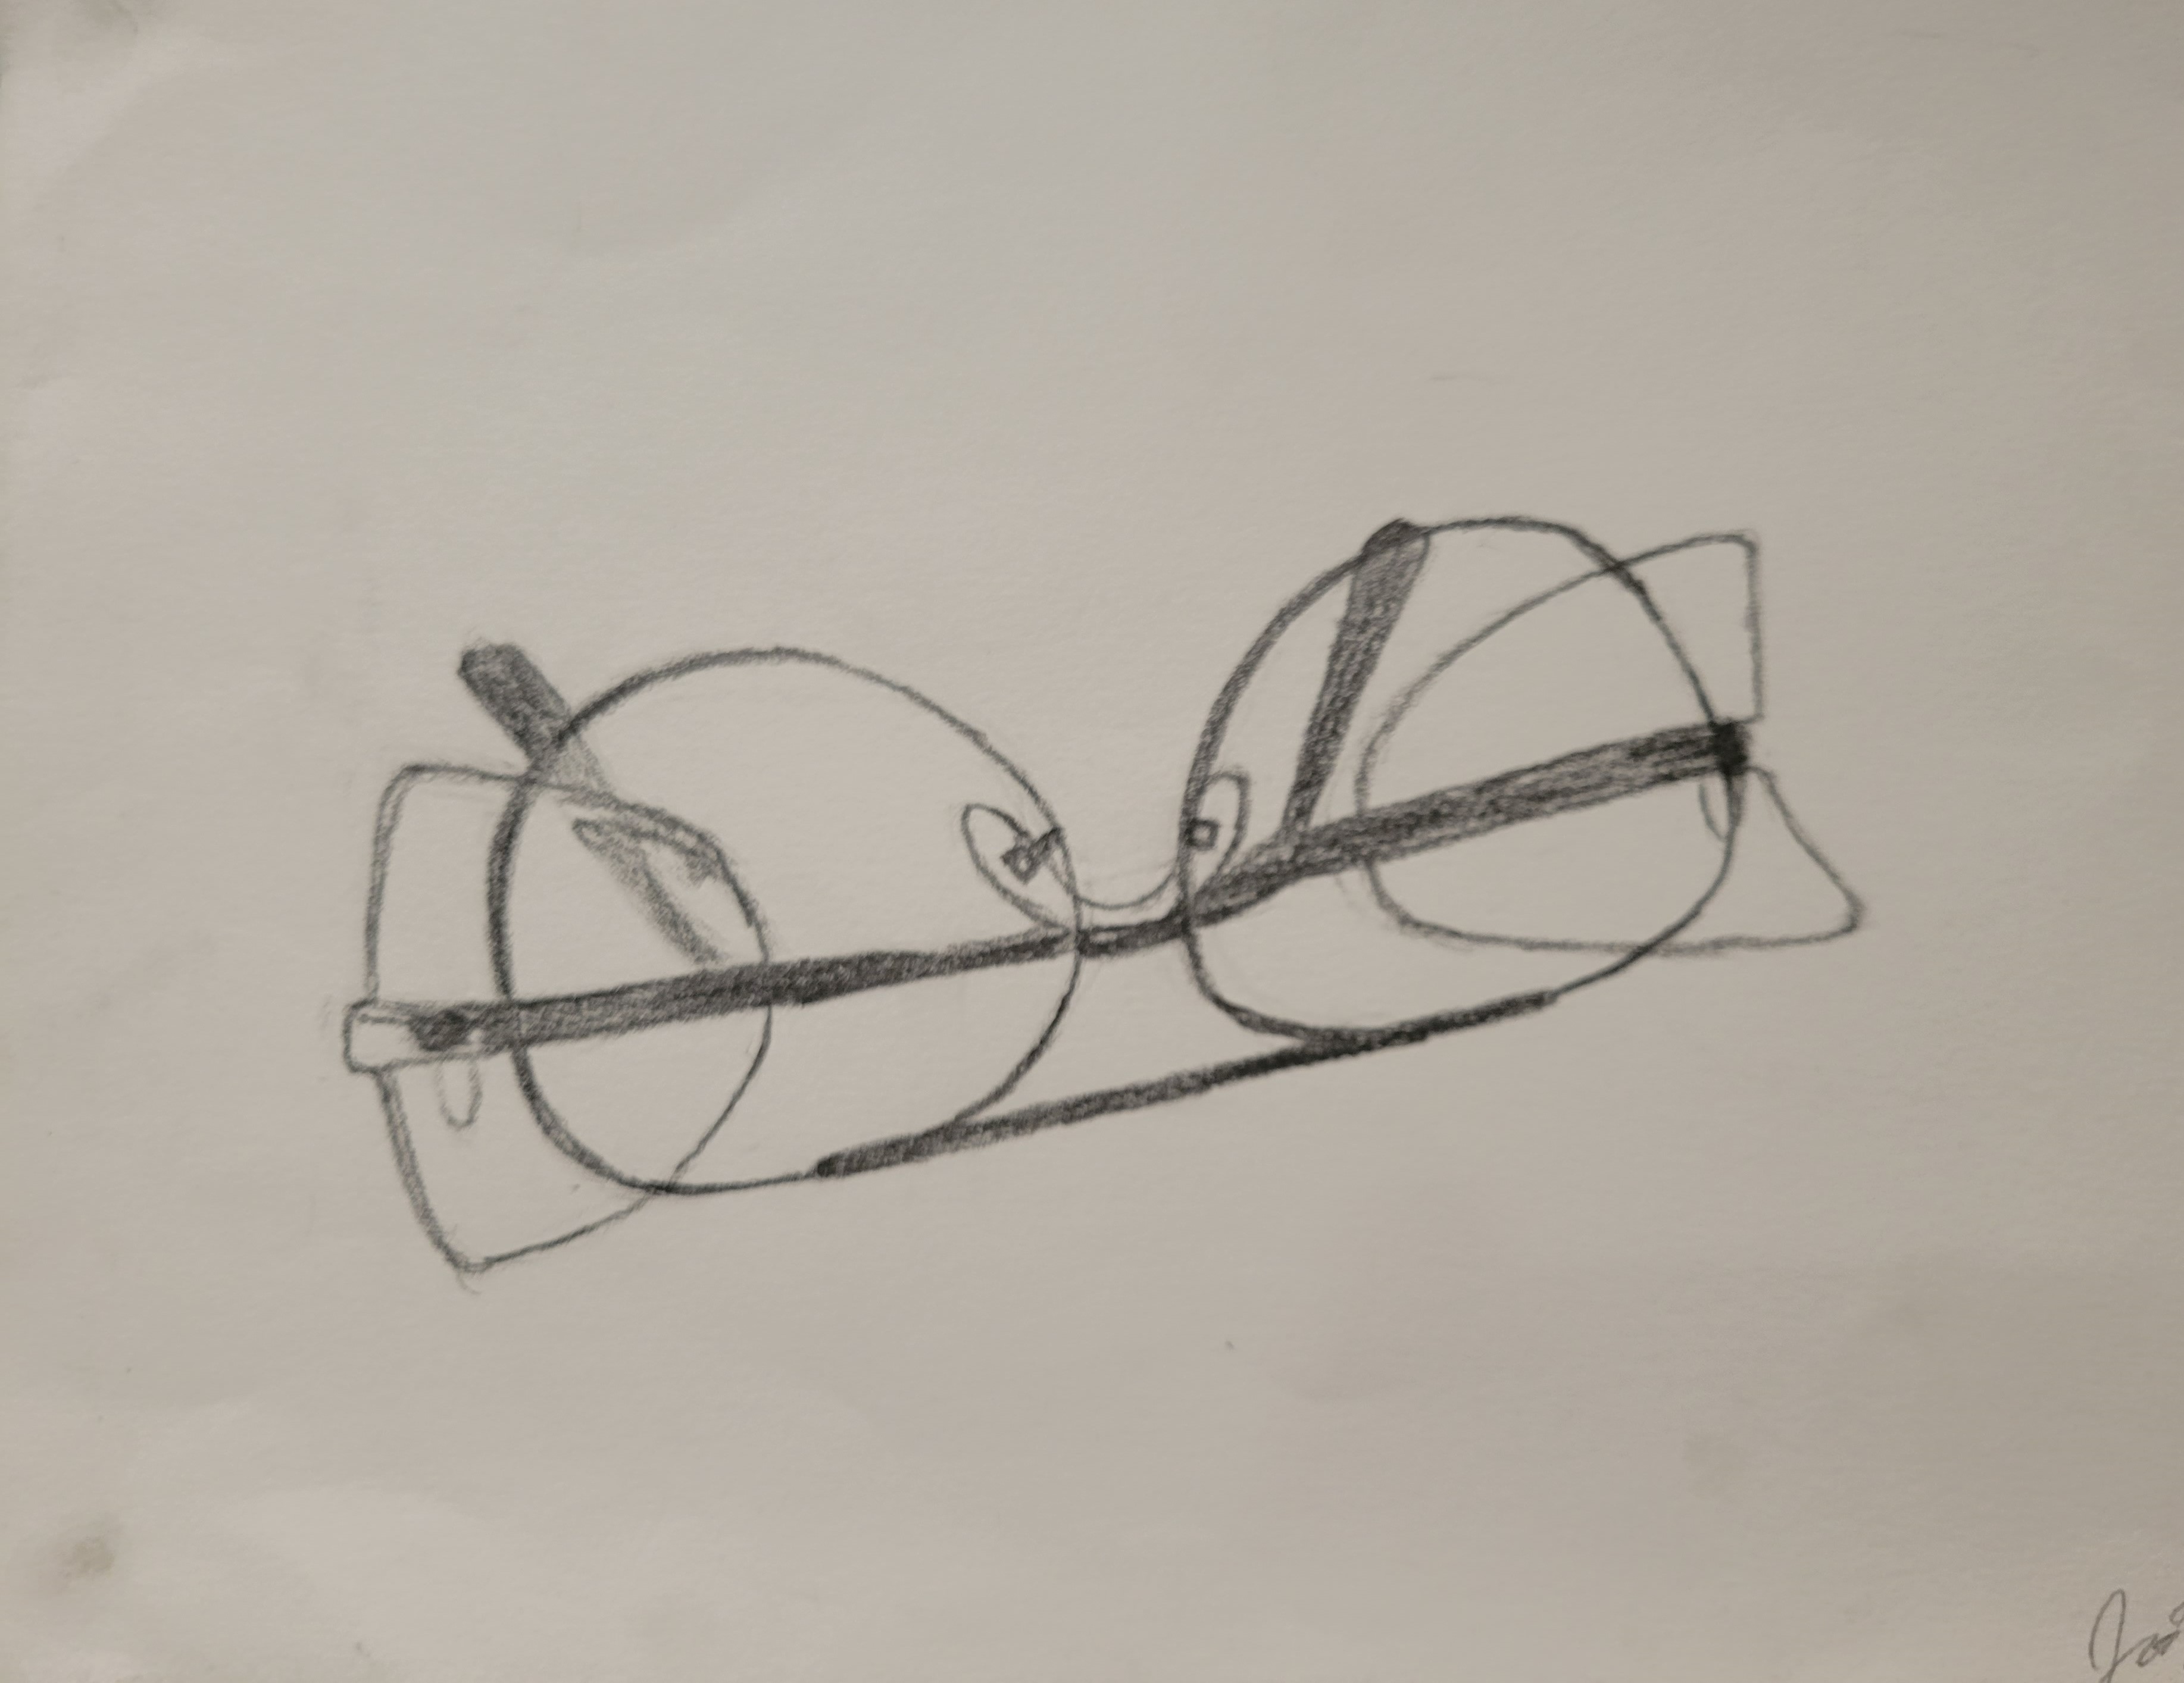 a sketch of a pair of safety glasses